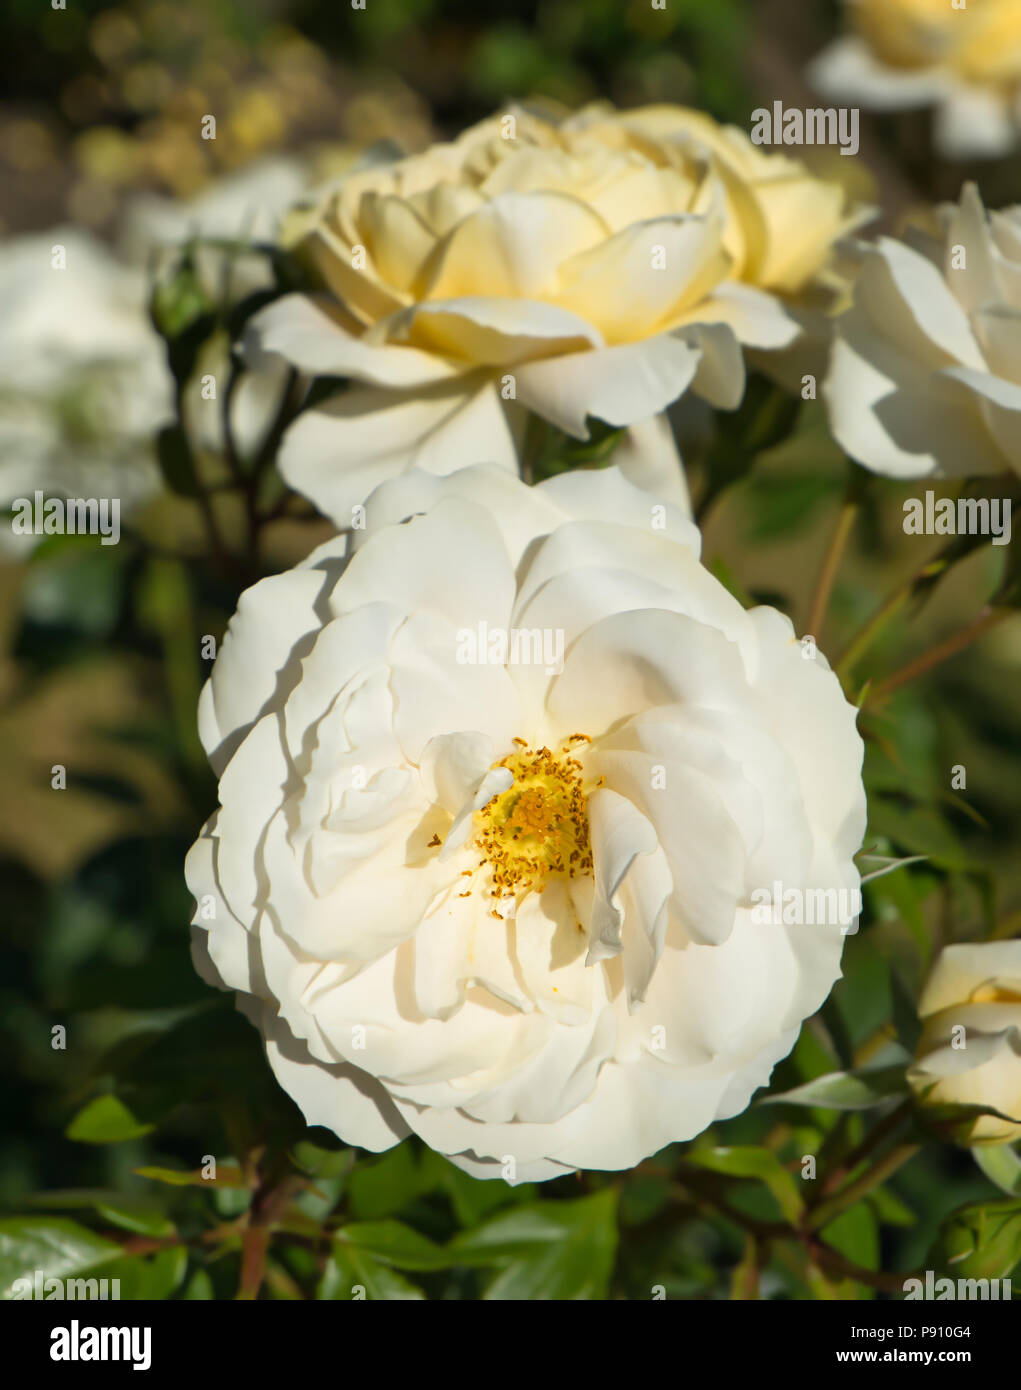 A white rose blossom with blurred background Stock Photo